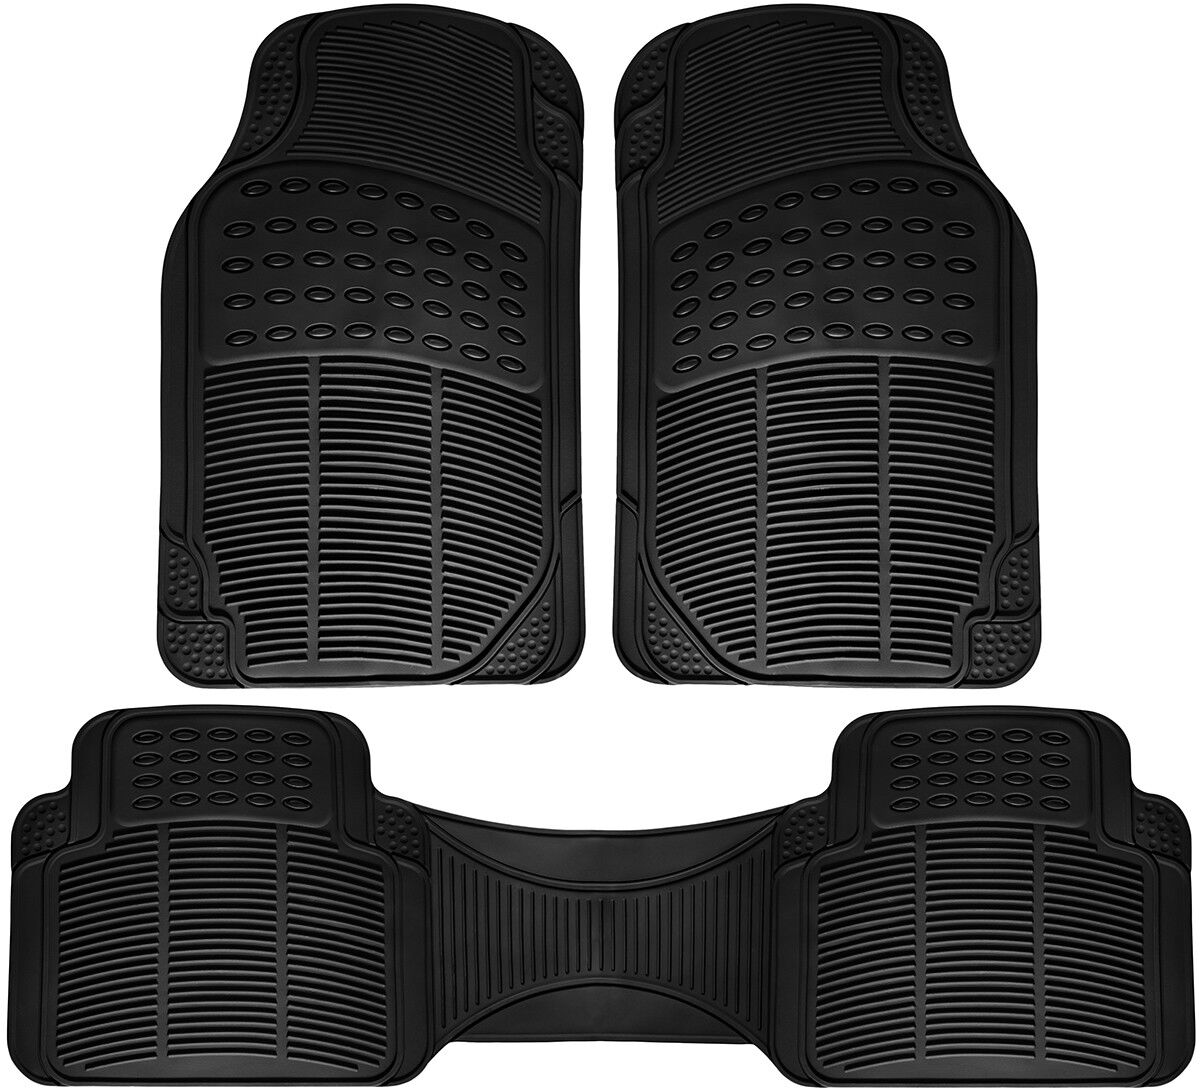 Car Floor Mats for Toyota Camry 3pc Set All Weather Rubber Semi Custom Fit Black